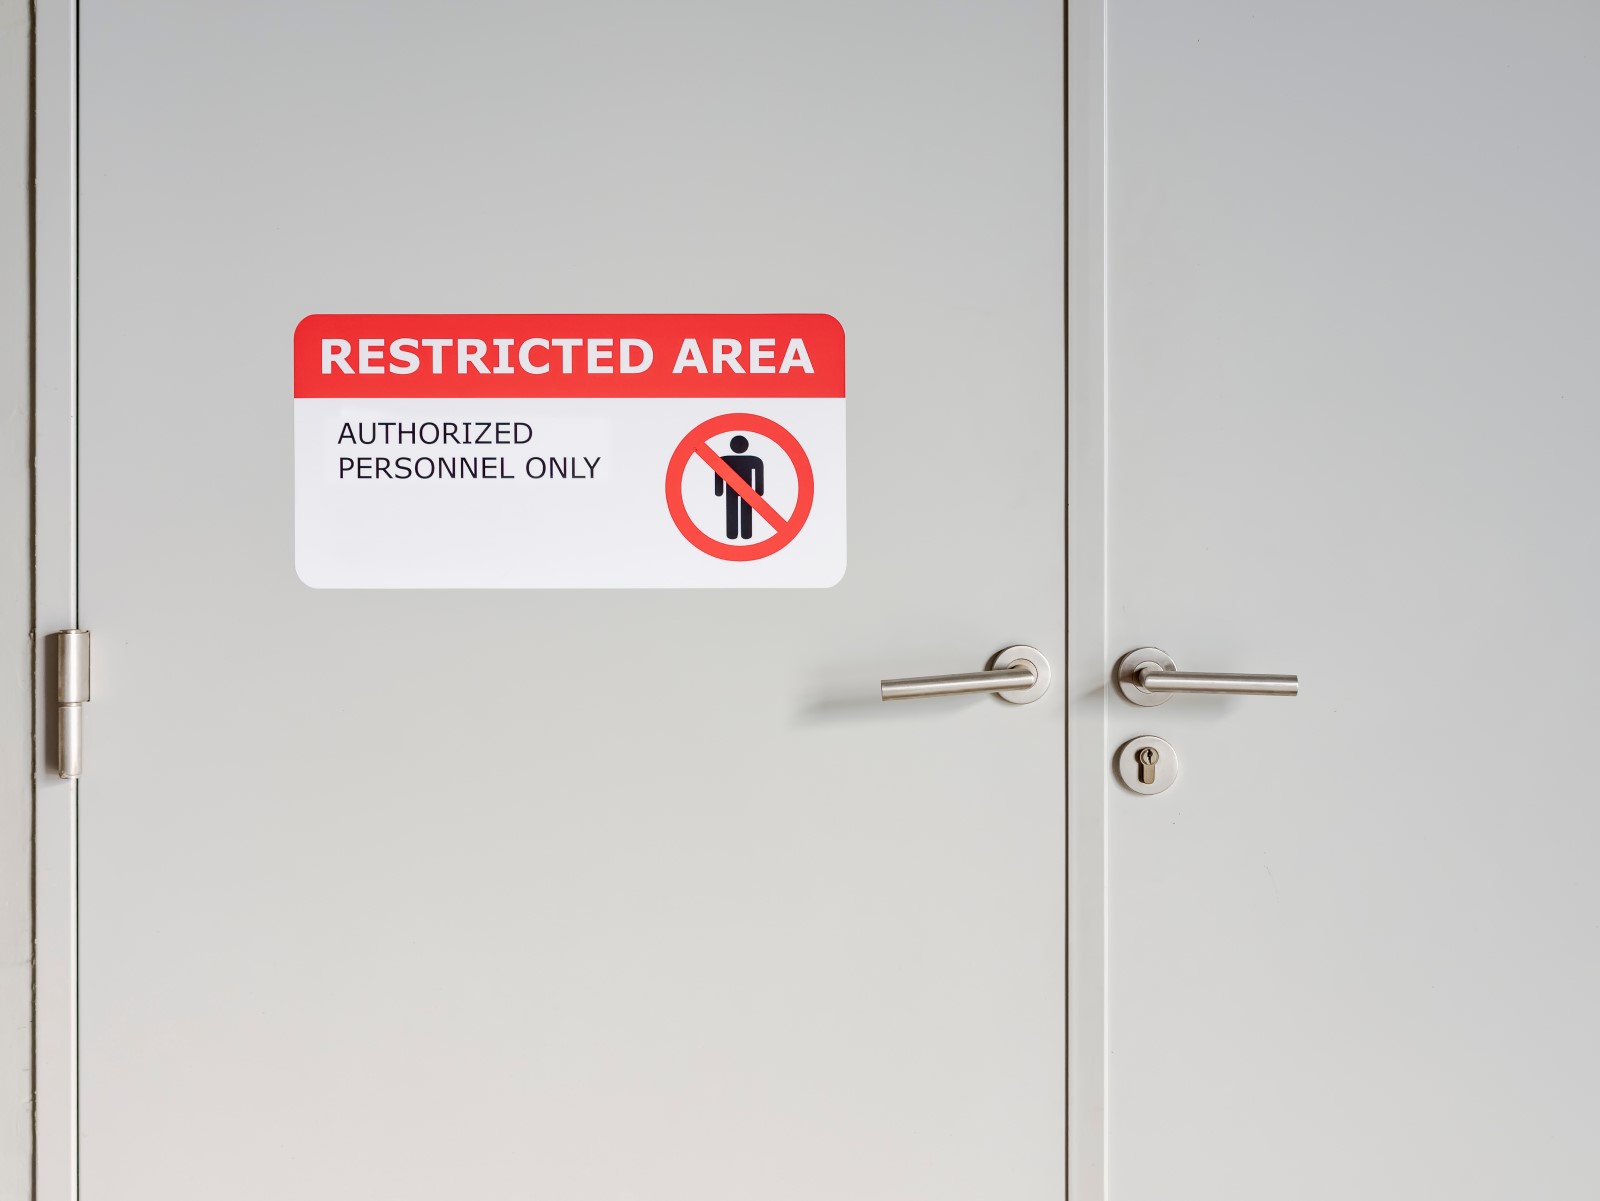 healthcare security systems can monitor restricted areas giving only authorized staff access